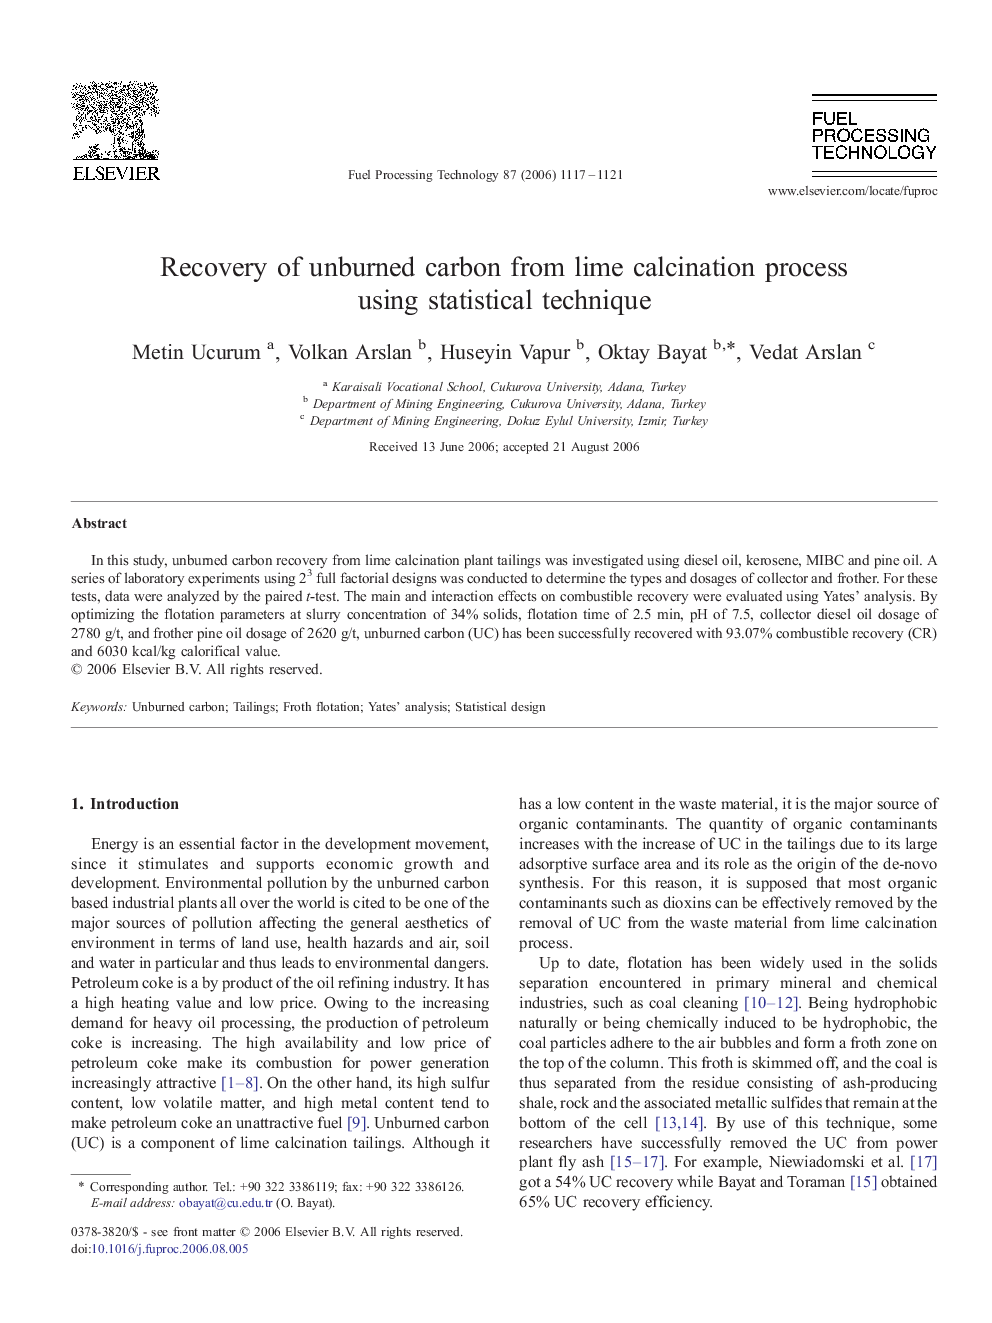 Recovery of unburned carbon from lime calcination process using statistical technique